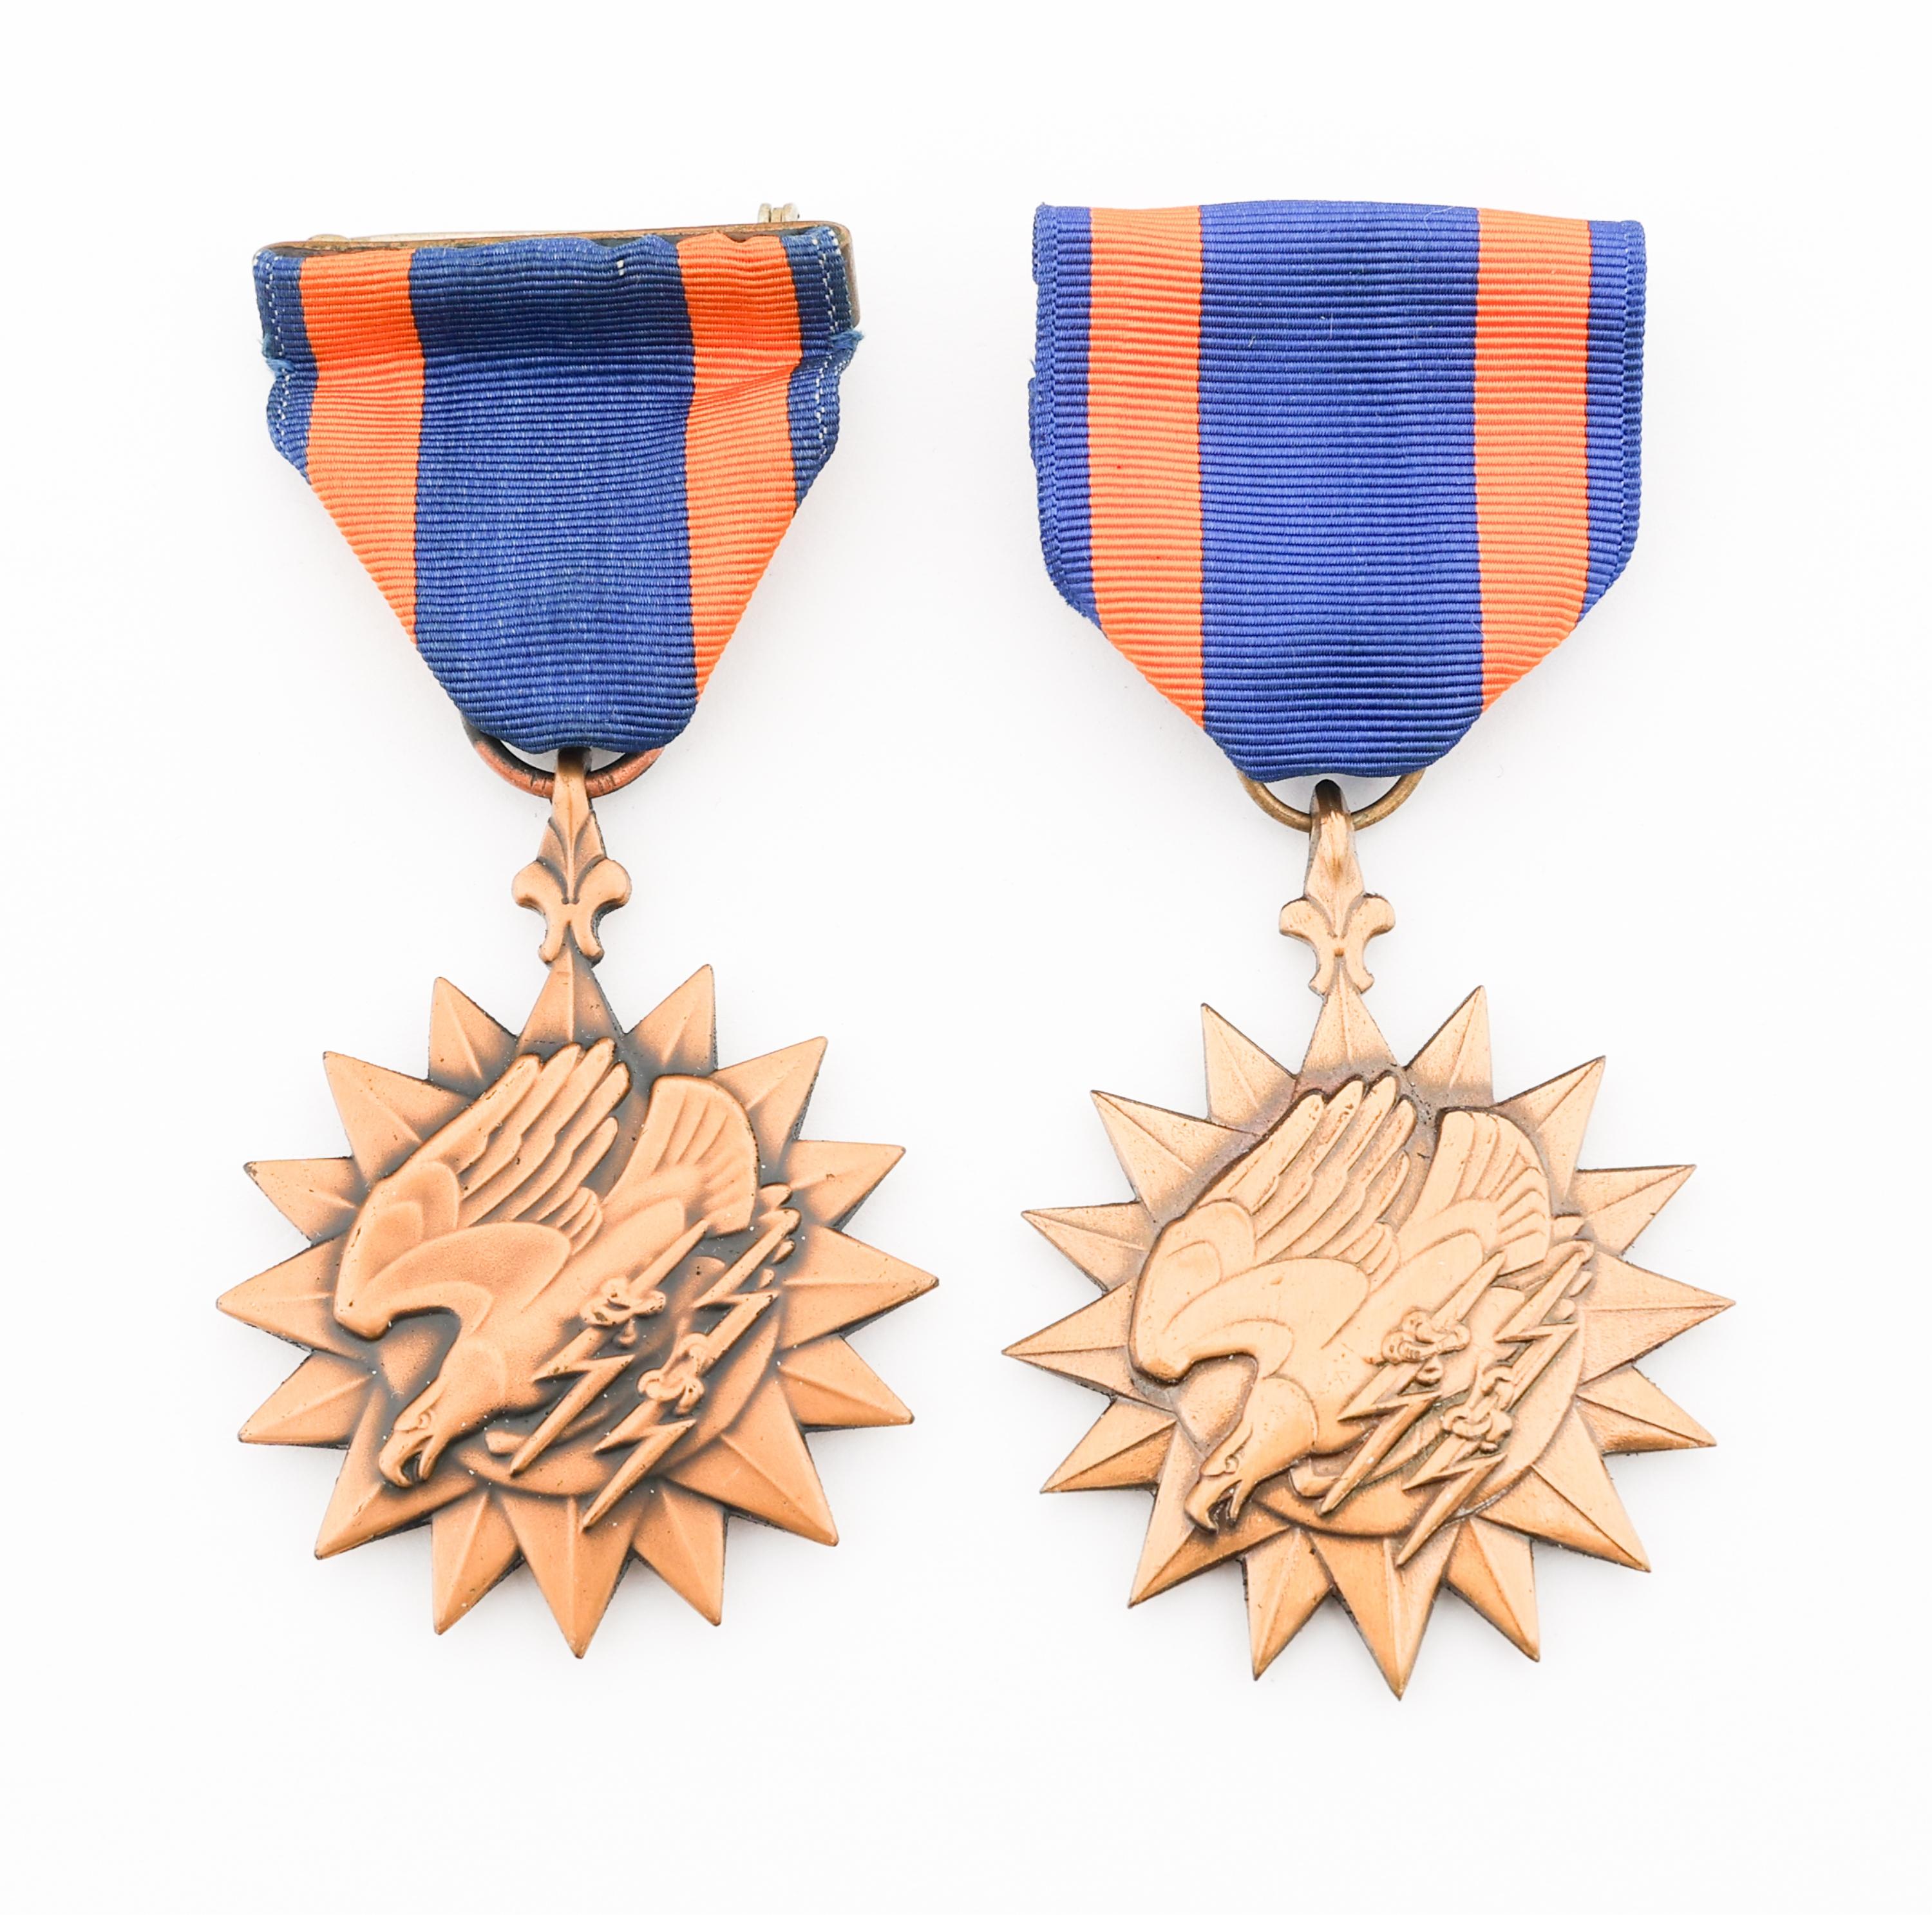 WWII US ARMED FORCES MEDALS & RIBBONS